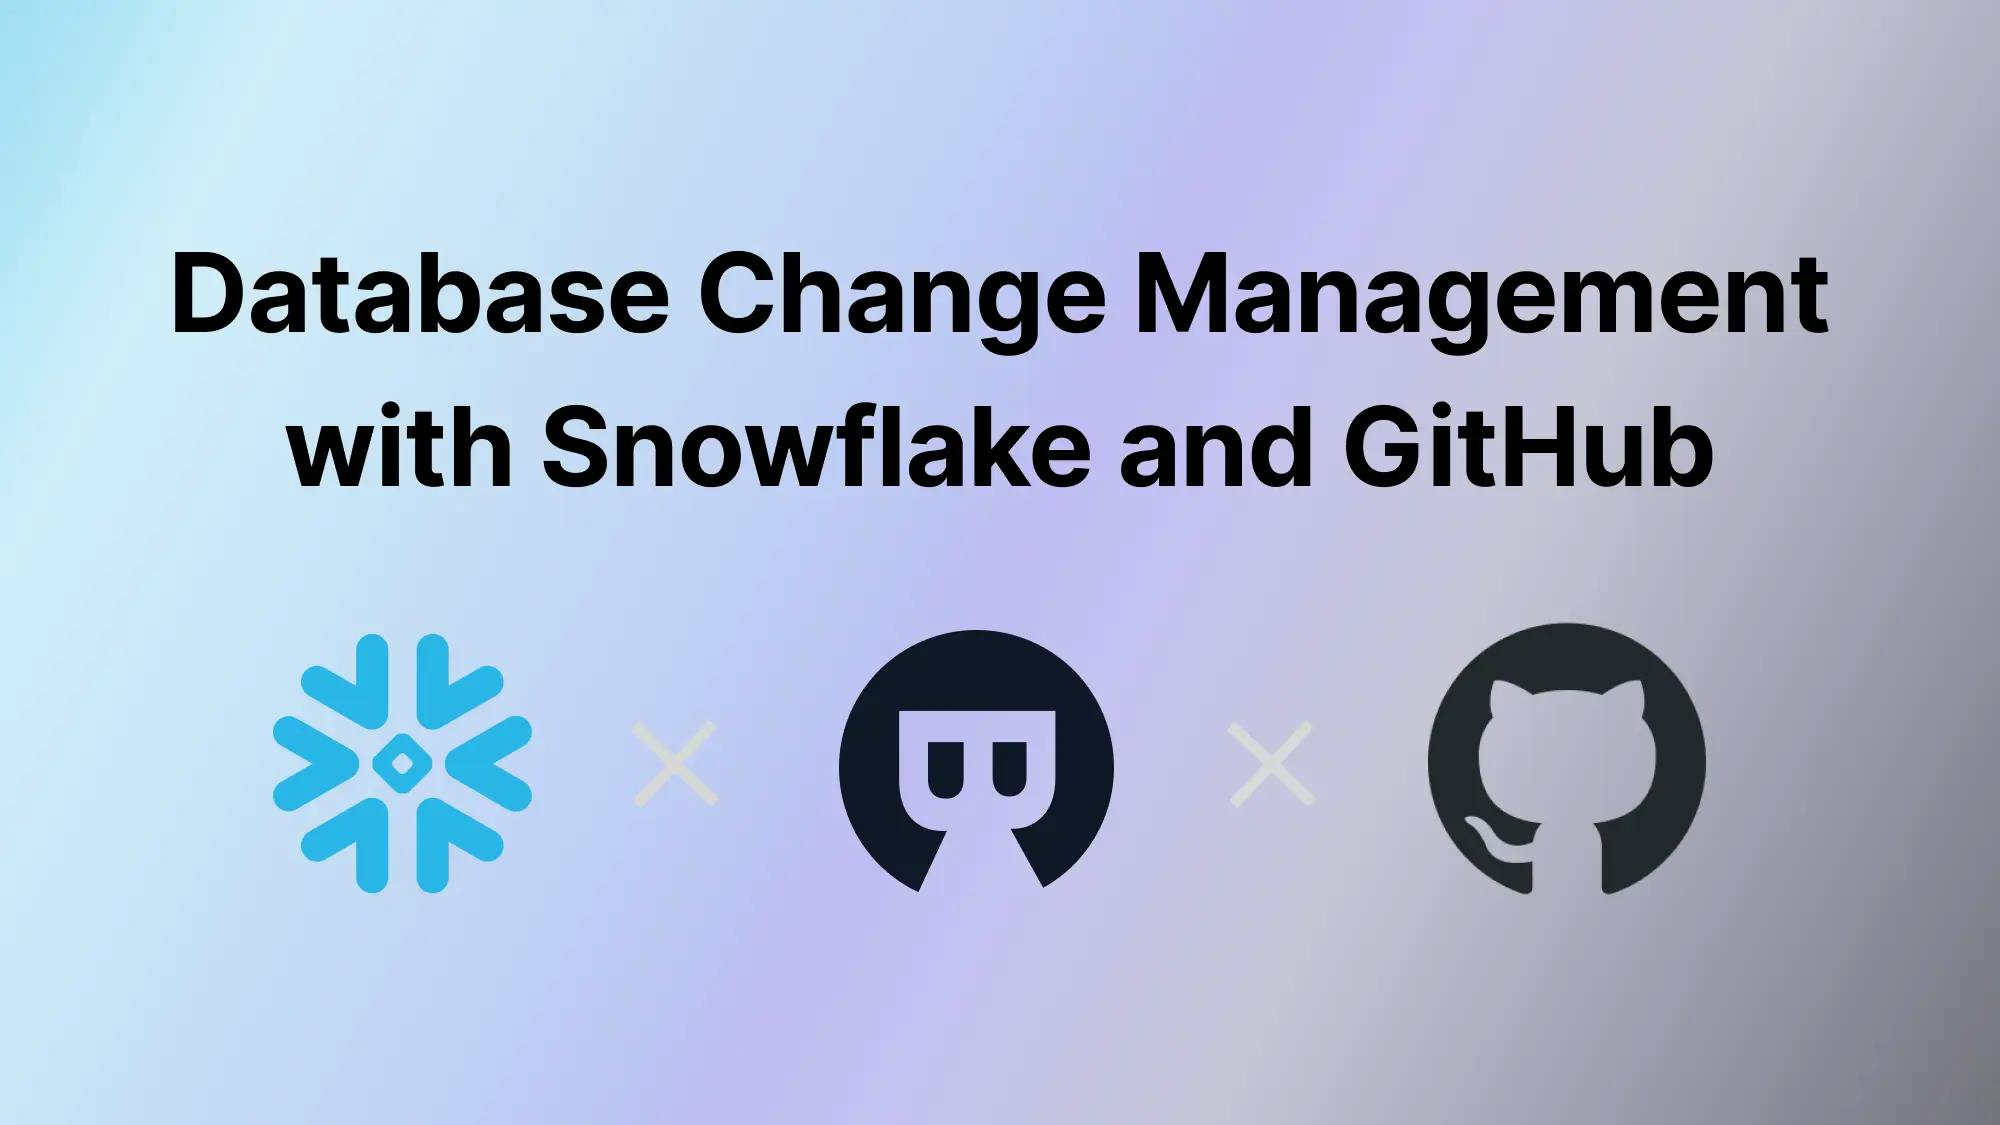 DevOps: Database Change Management with Snowflake and GitHub